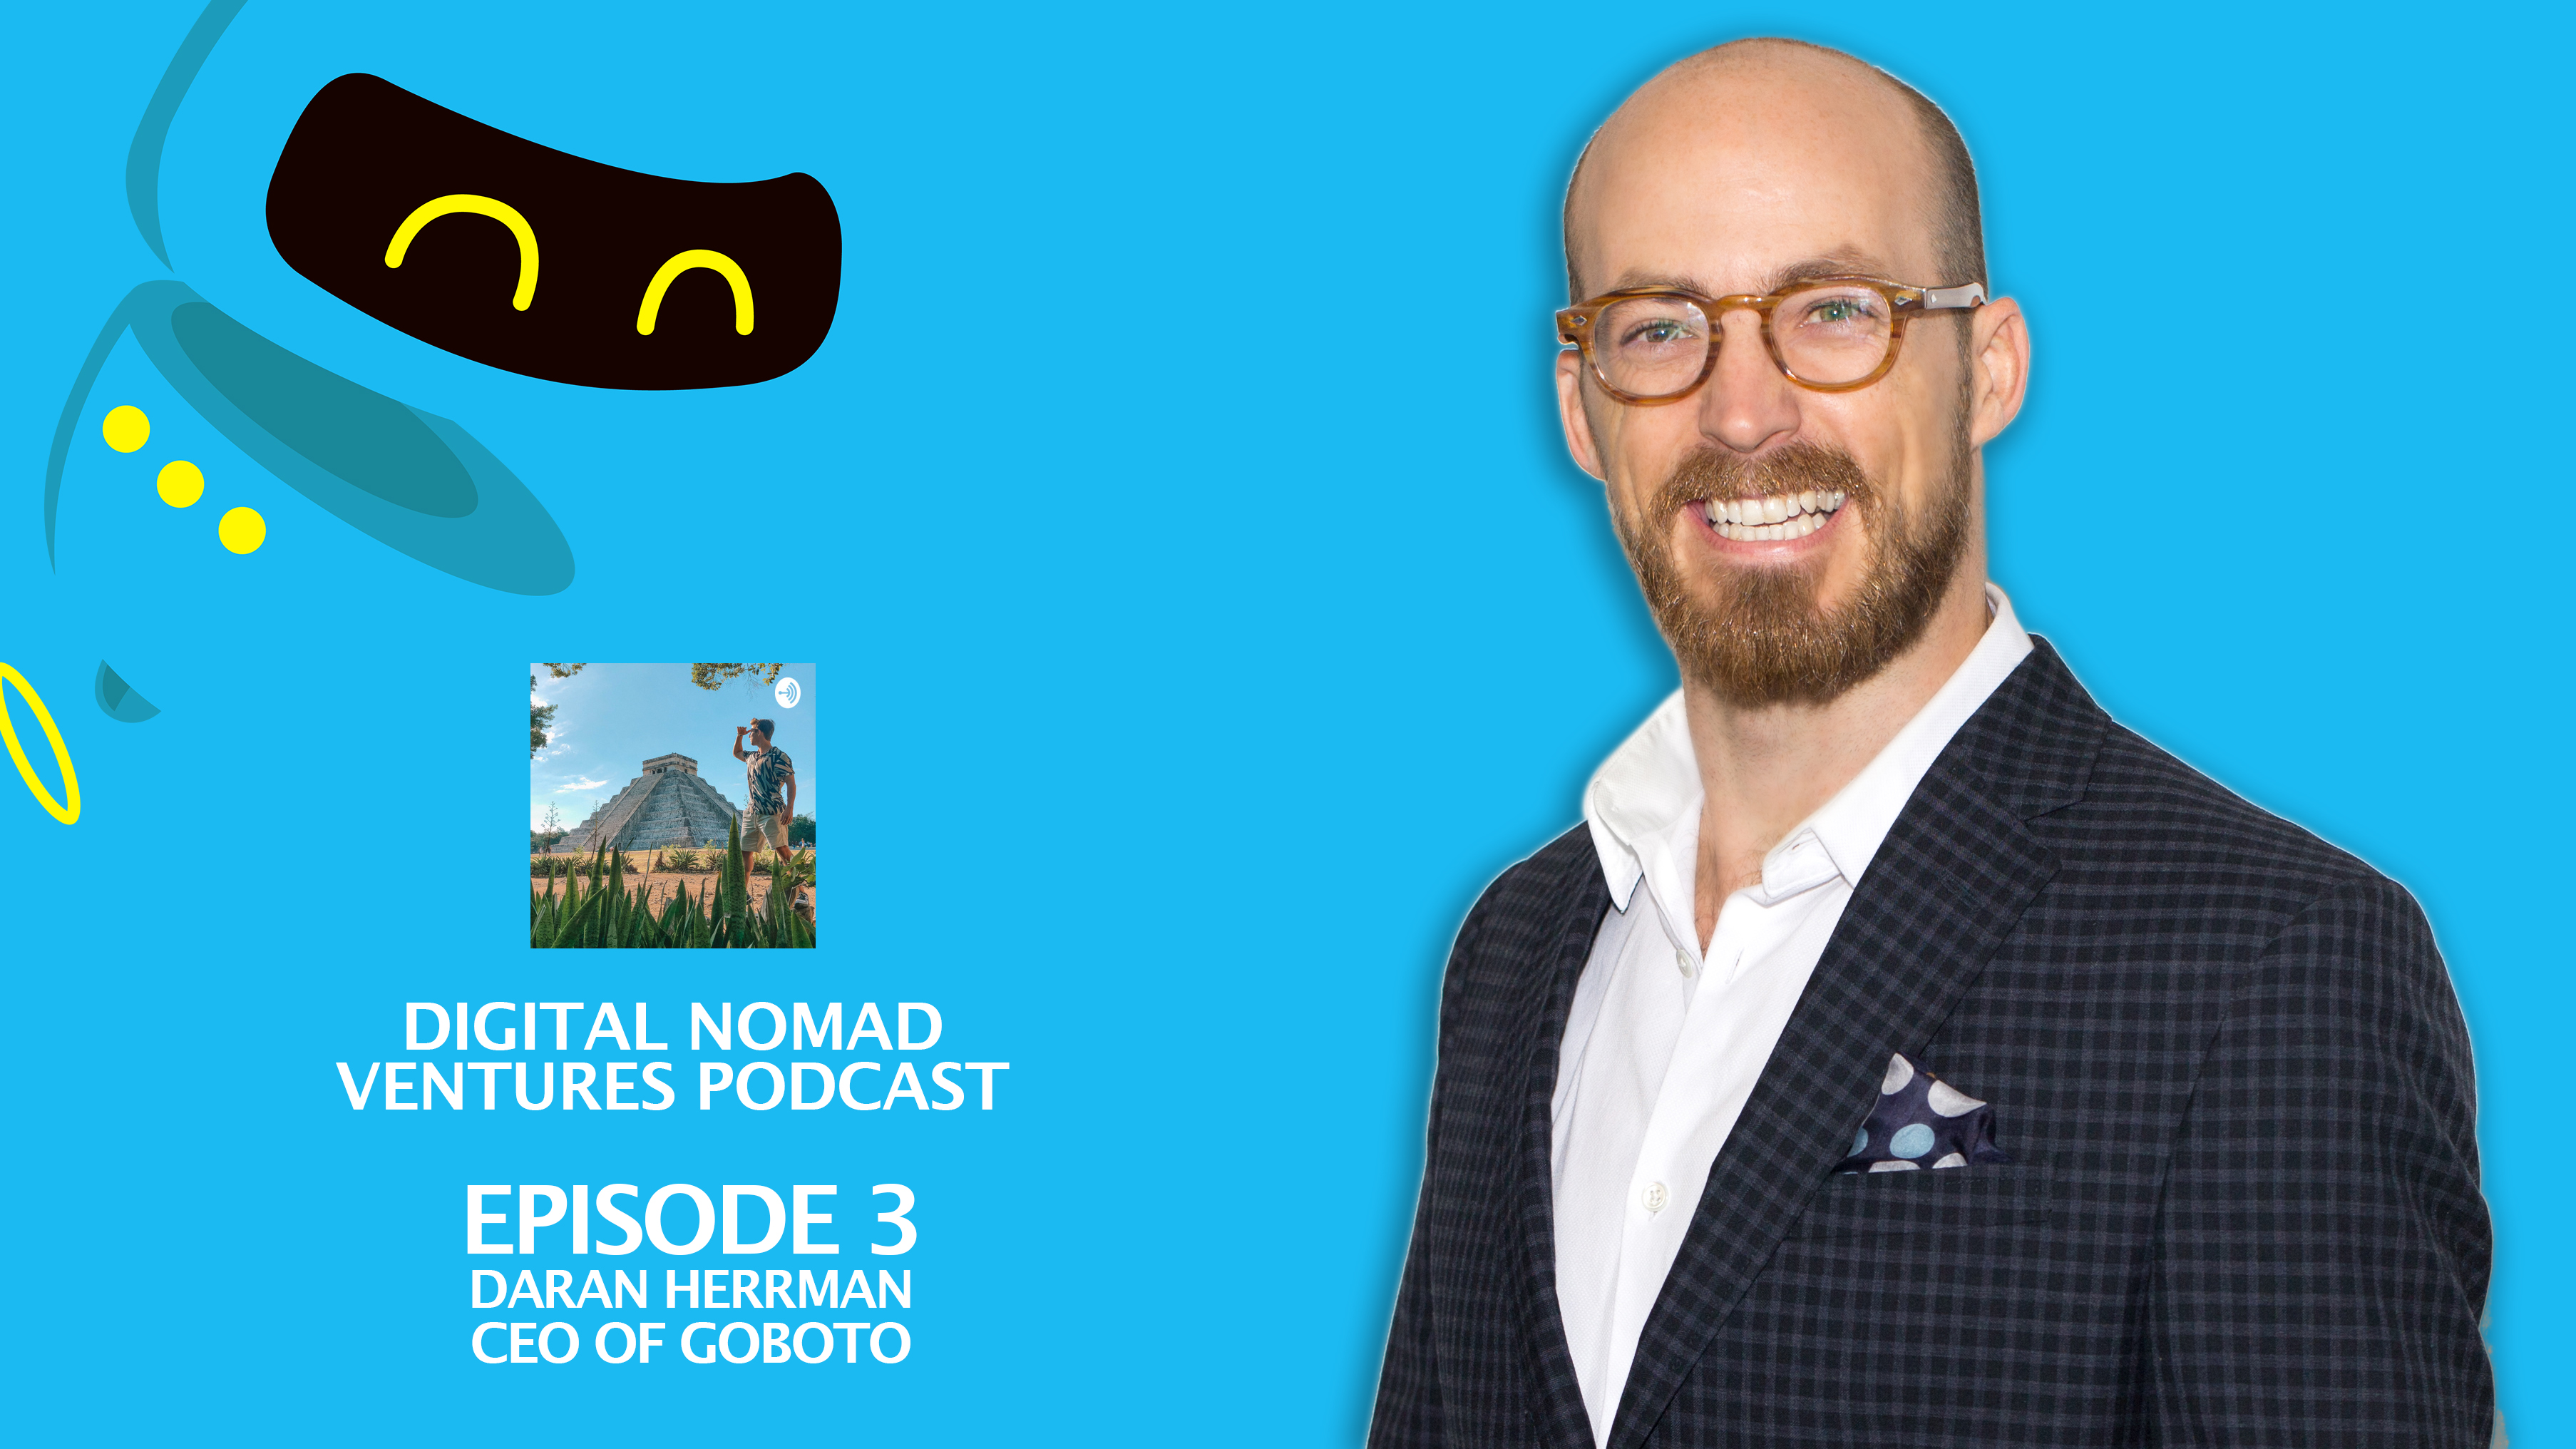 An episode of Digital Nomad Ventures with Goboto CEO